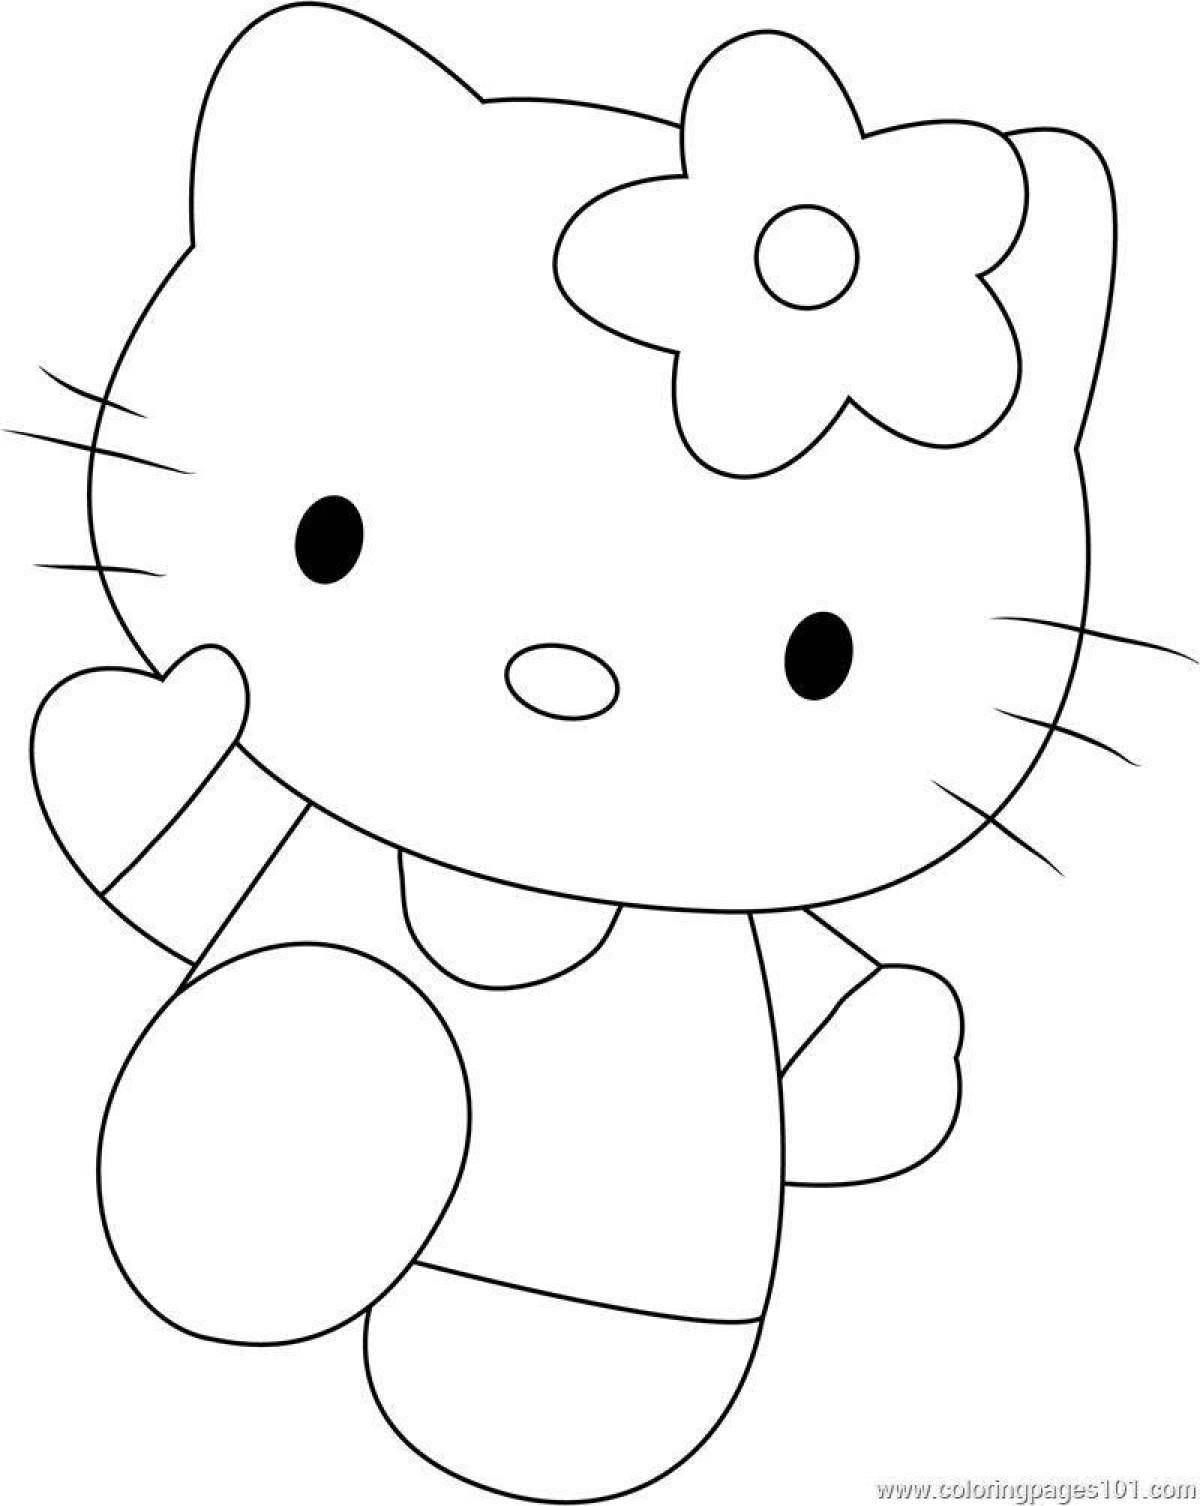 Adorable hello kitty face coloring page